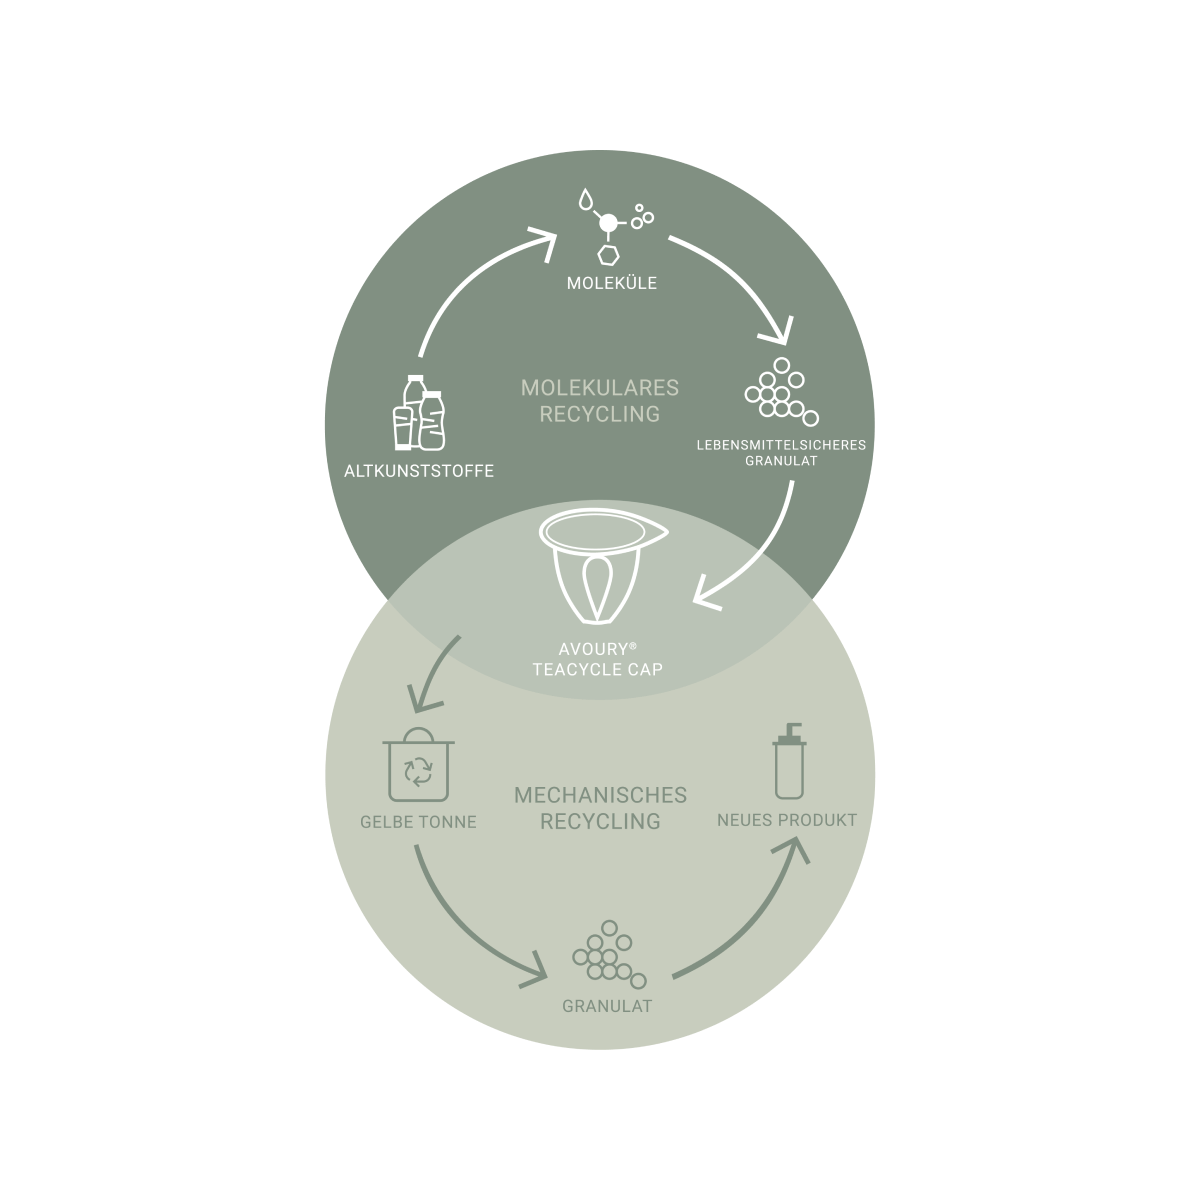 Picture describes the circular economy of Avourys TeaCycle Cap